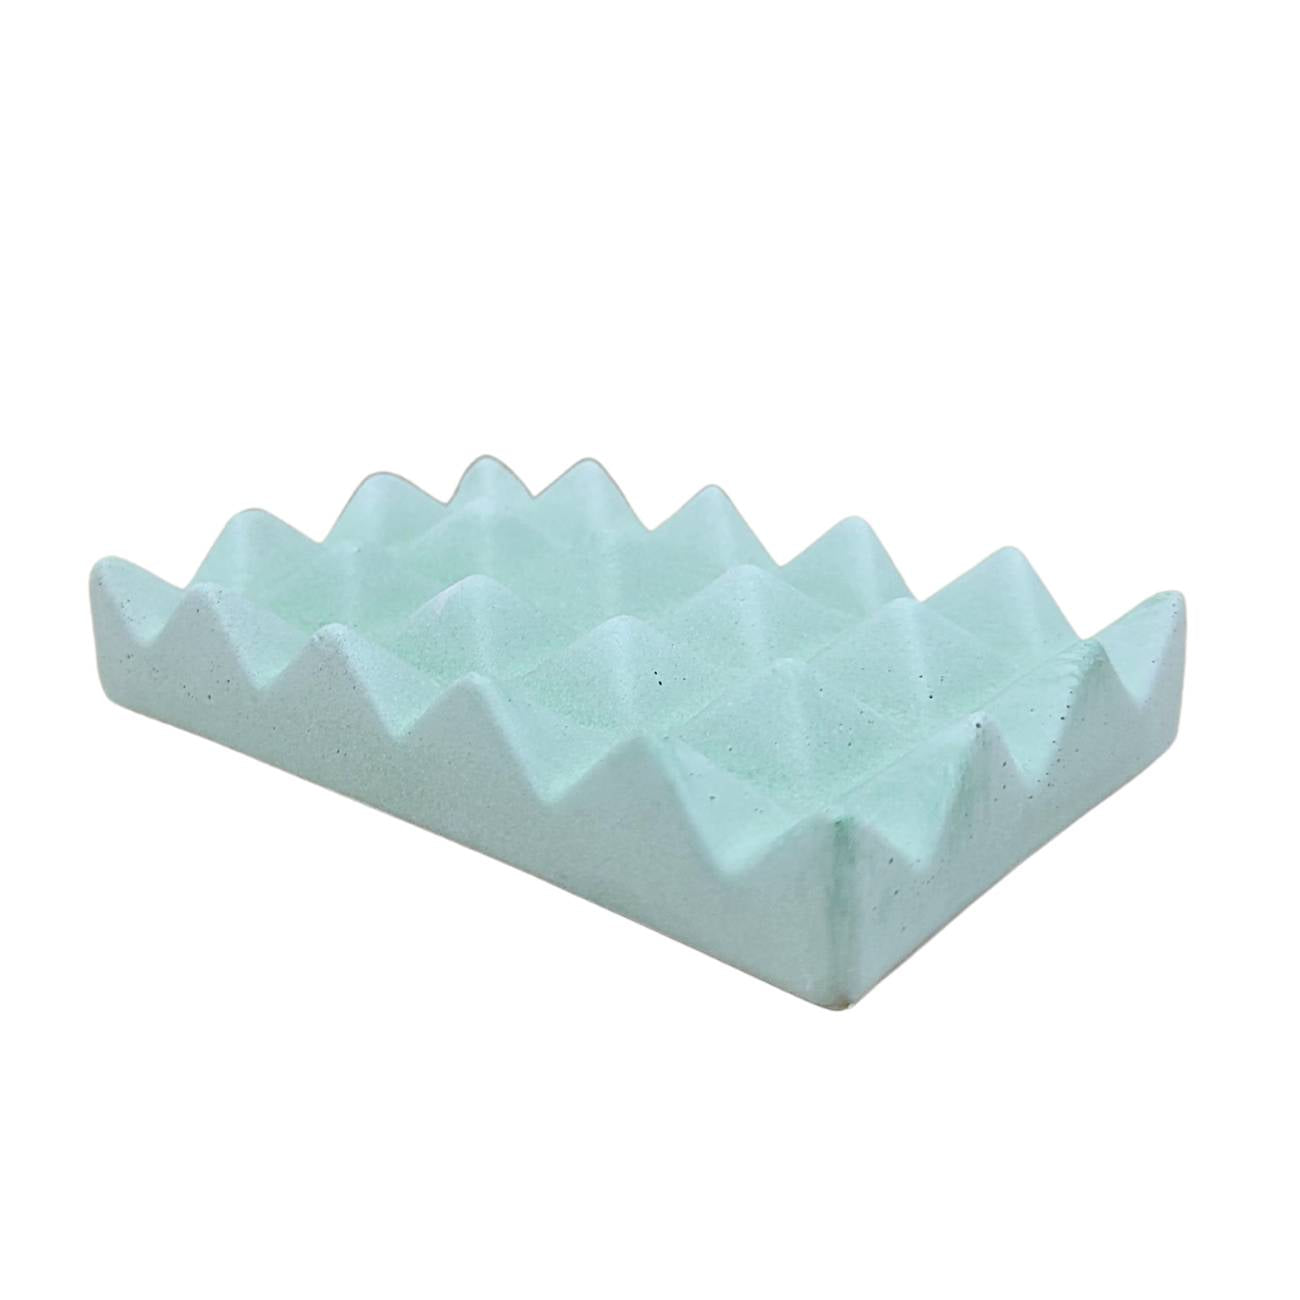 Draining Concrete Soap Dish | Fern Valley Soap | Made USA